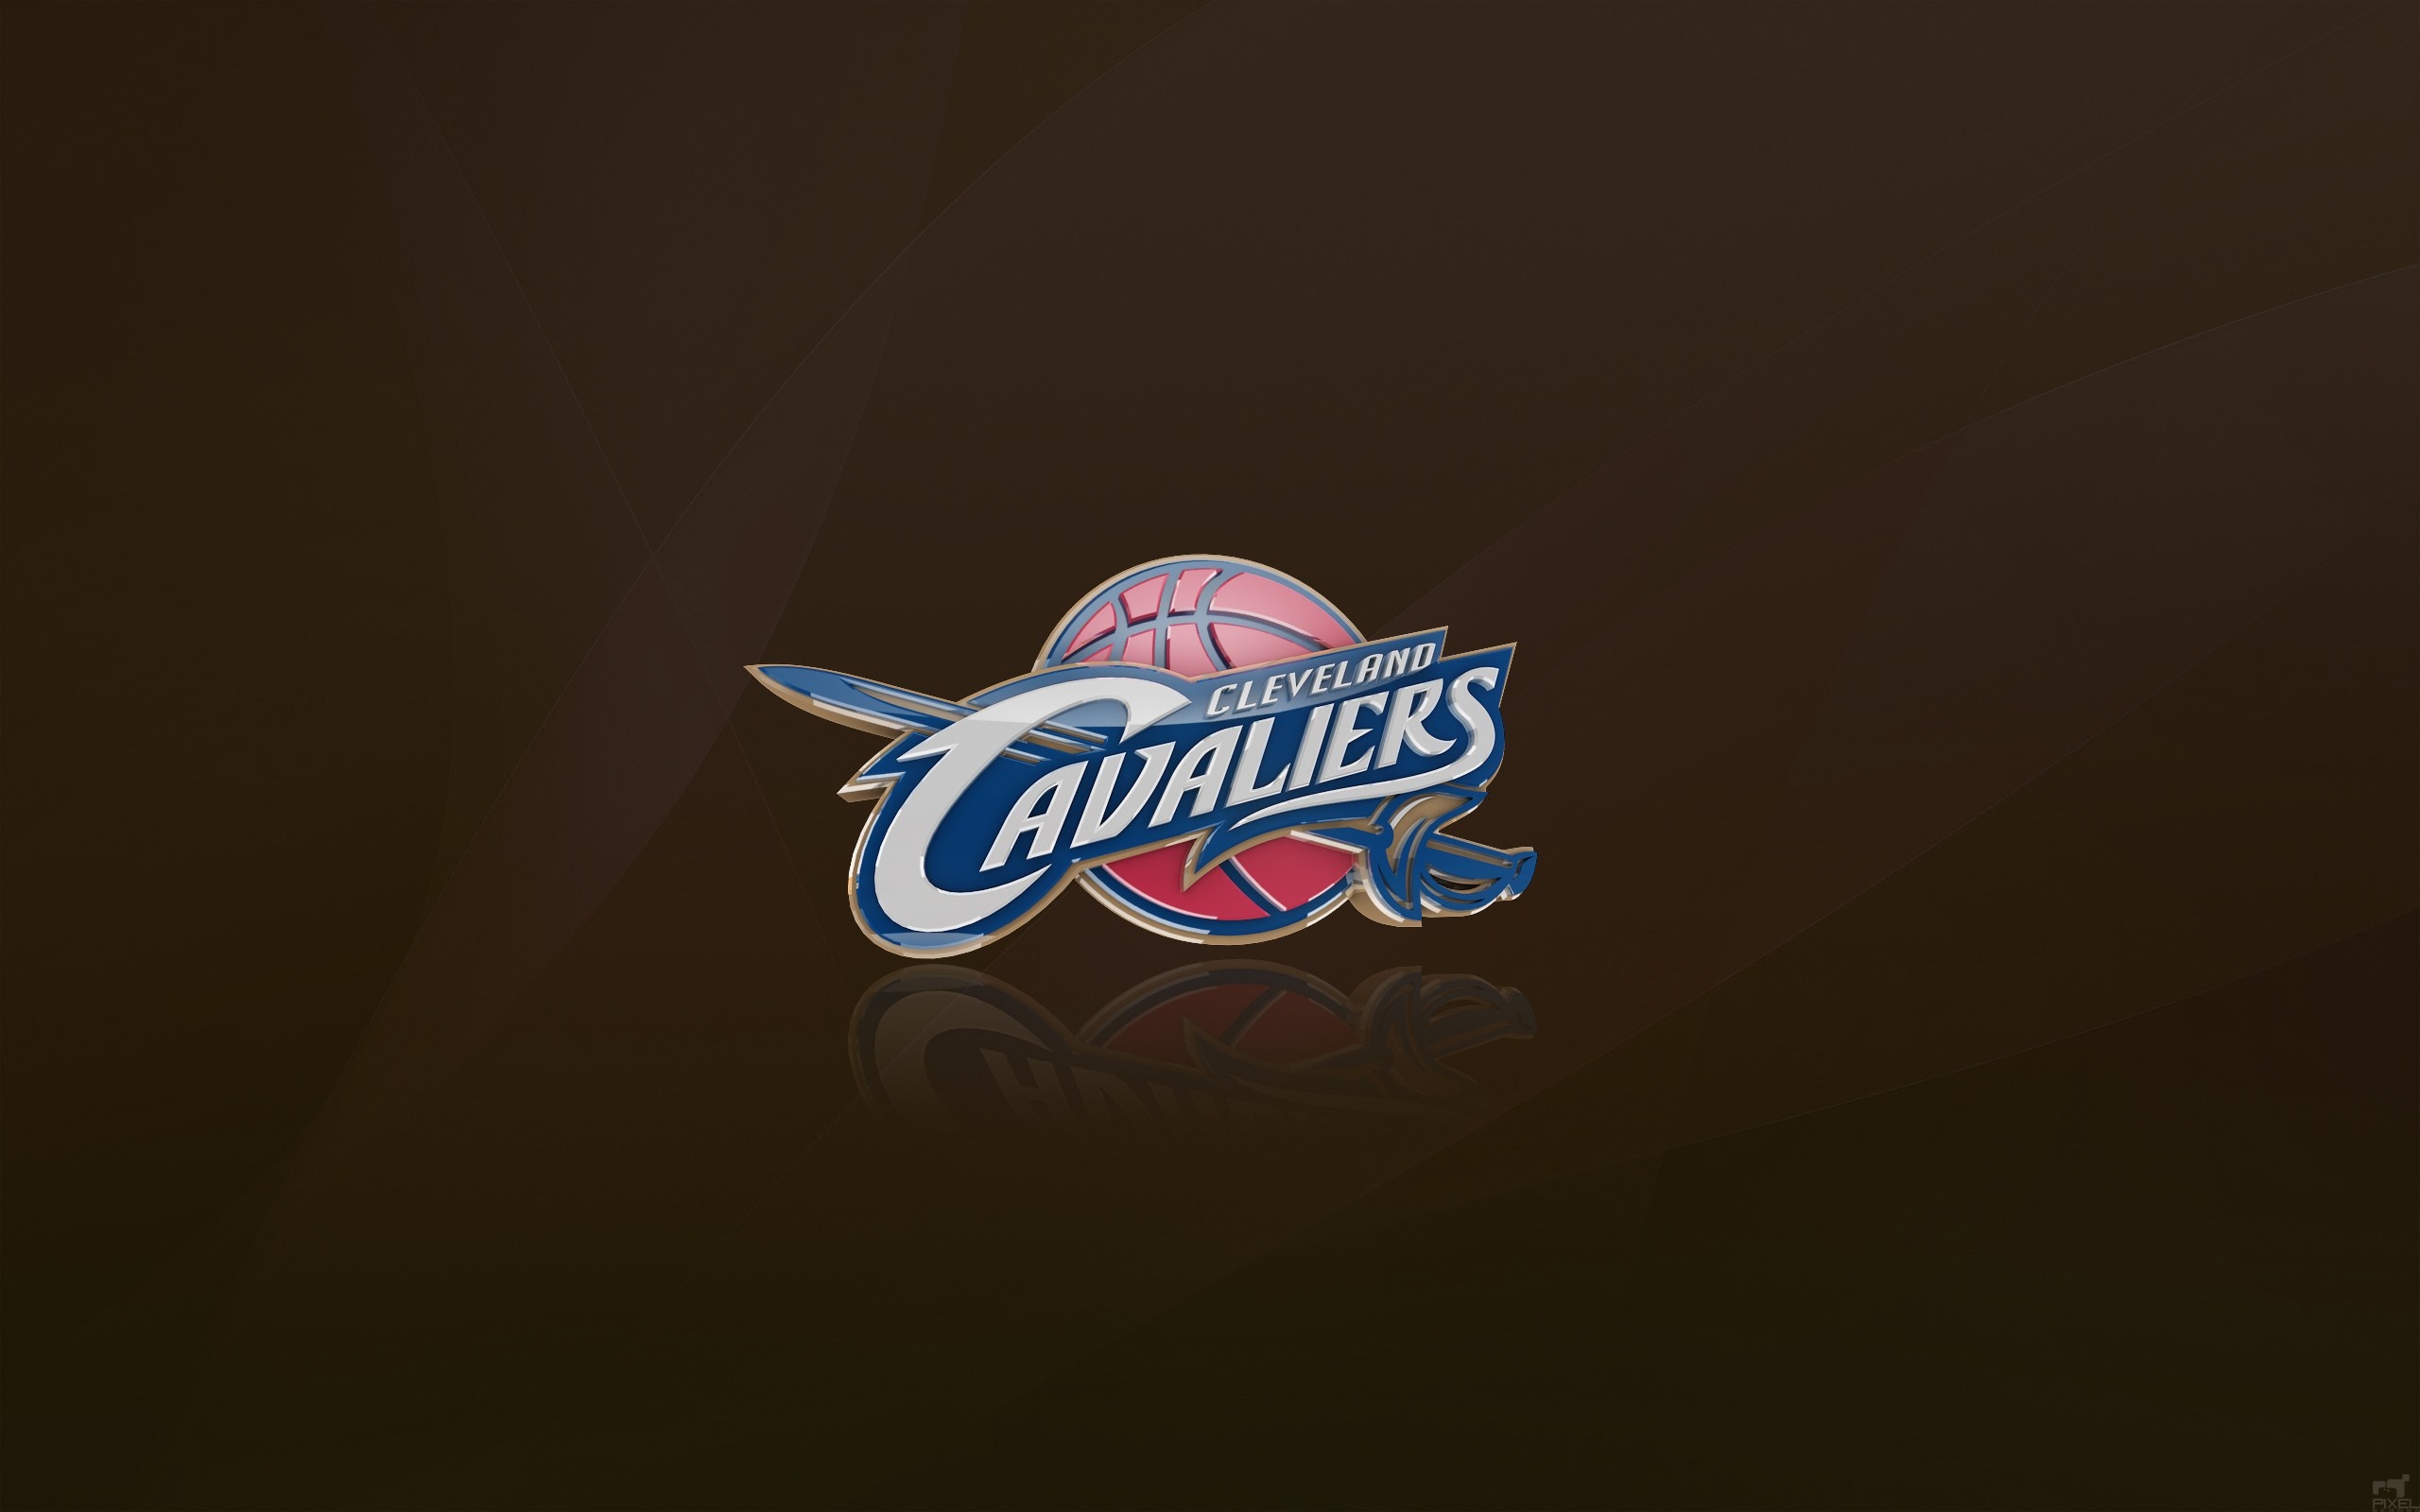 Cleveland Cavaliers: NBA, The team won their first Central Division title in 1976. 2560x1600 HD Wallpaper.